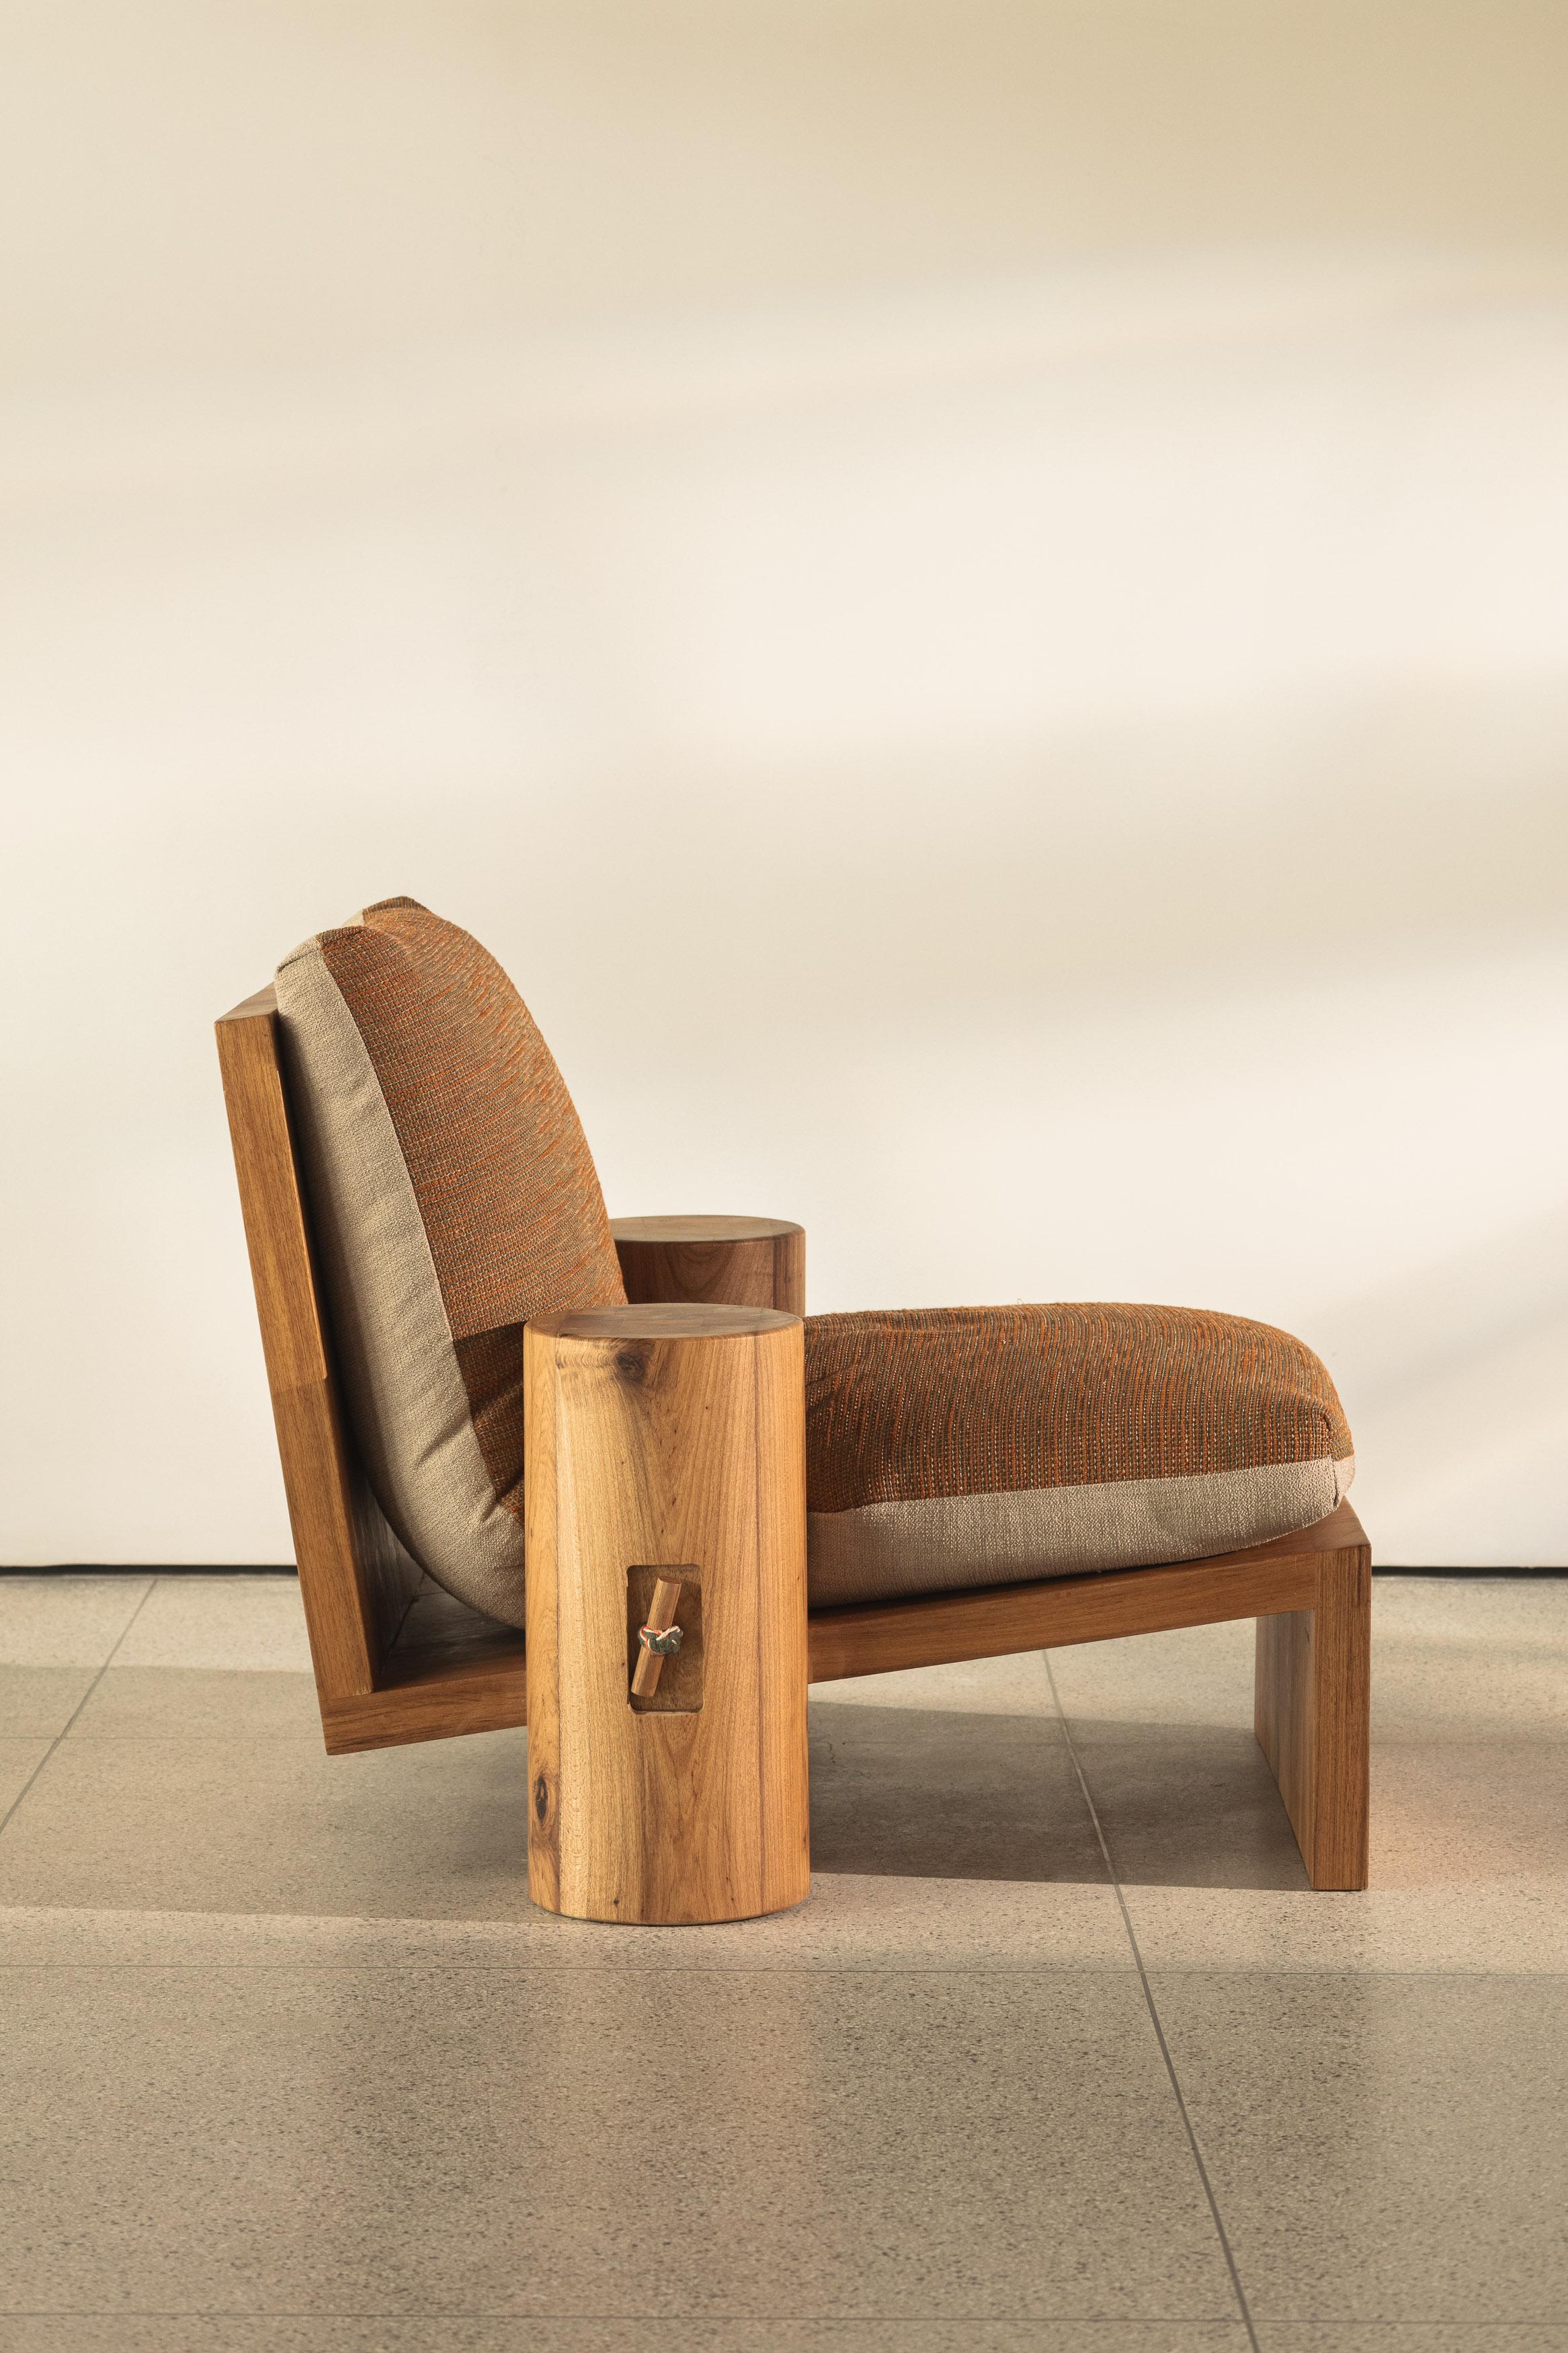 The Cais armchair draws inspiration from the traditional vernacular design of wooden docks located alongside the water.

The large cushion is securely positioned between two wooden cylinders, with a rope spanning the entire piece from one side to